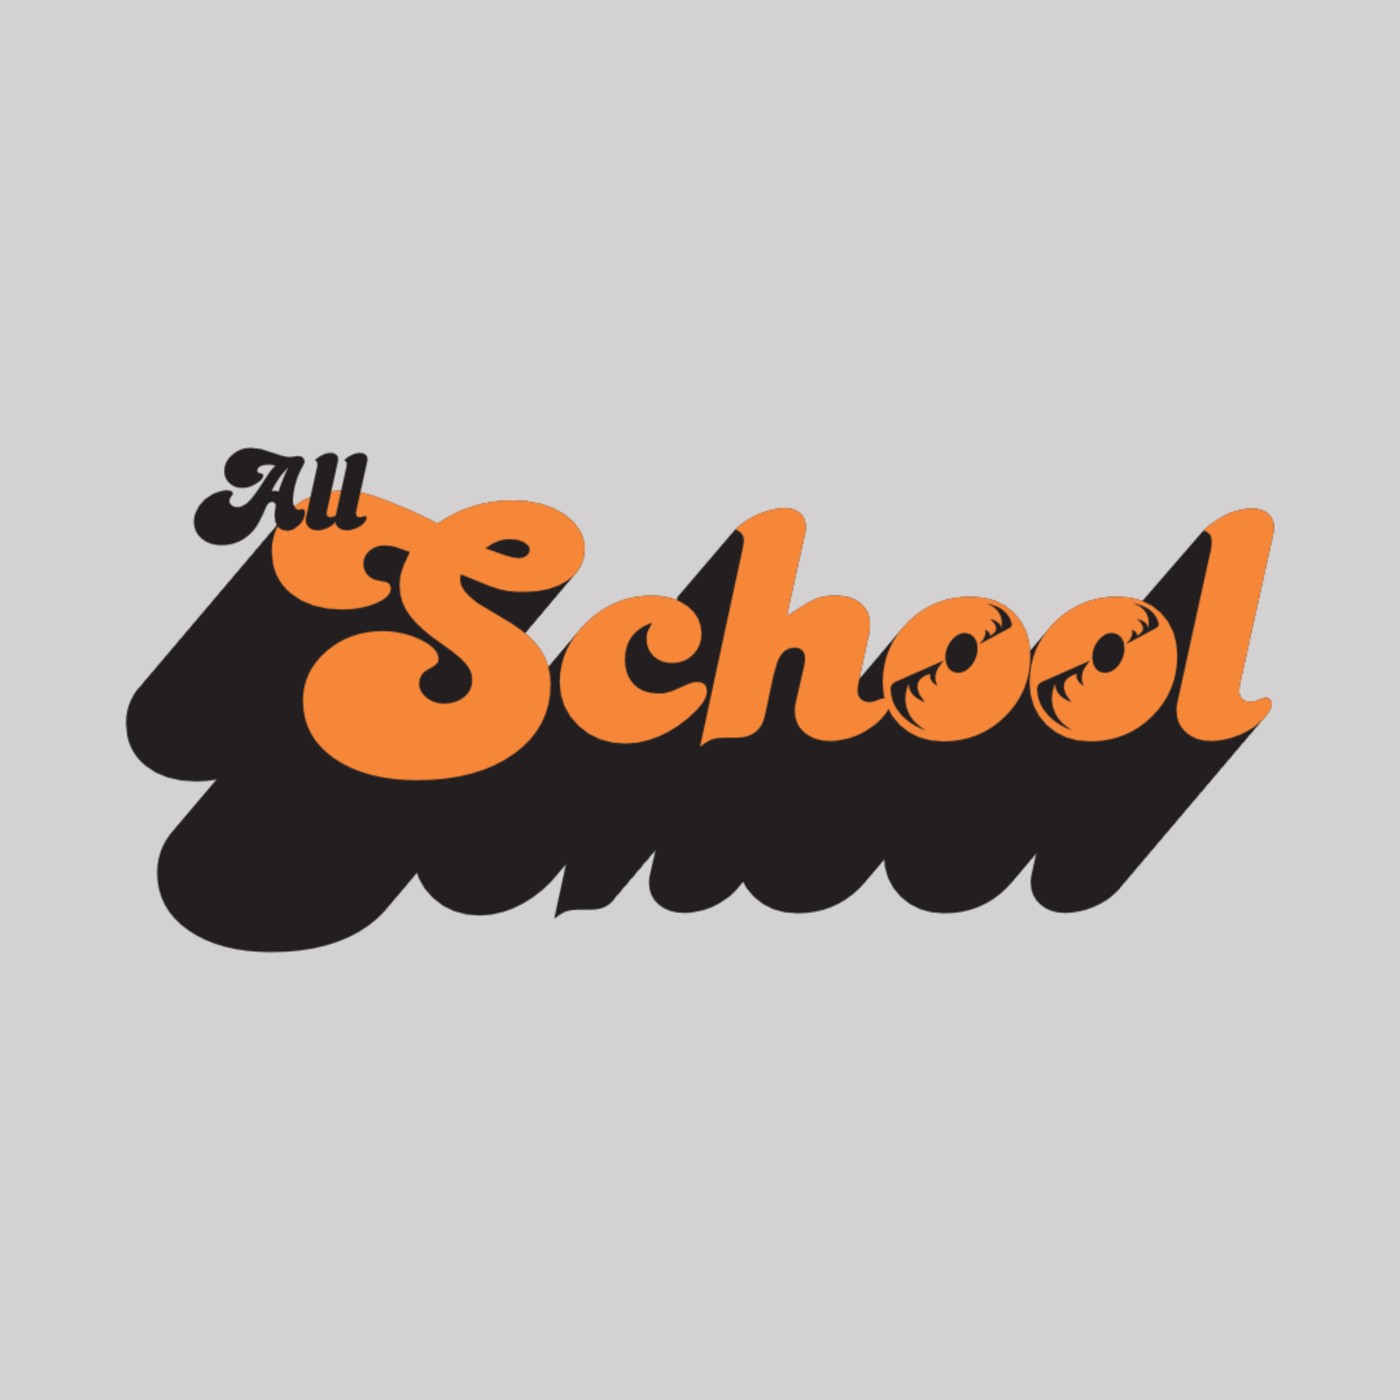 All School #2 feat. Comme1flocon